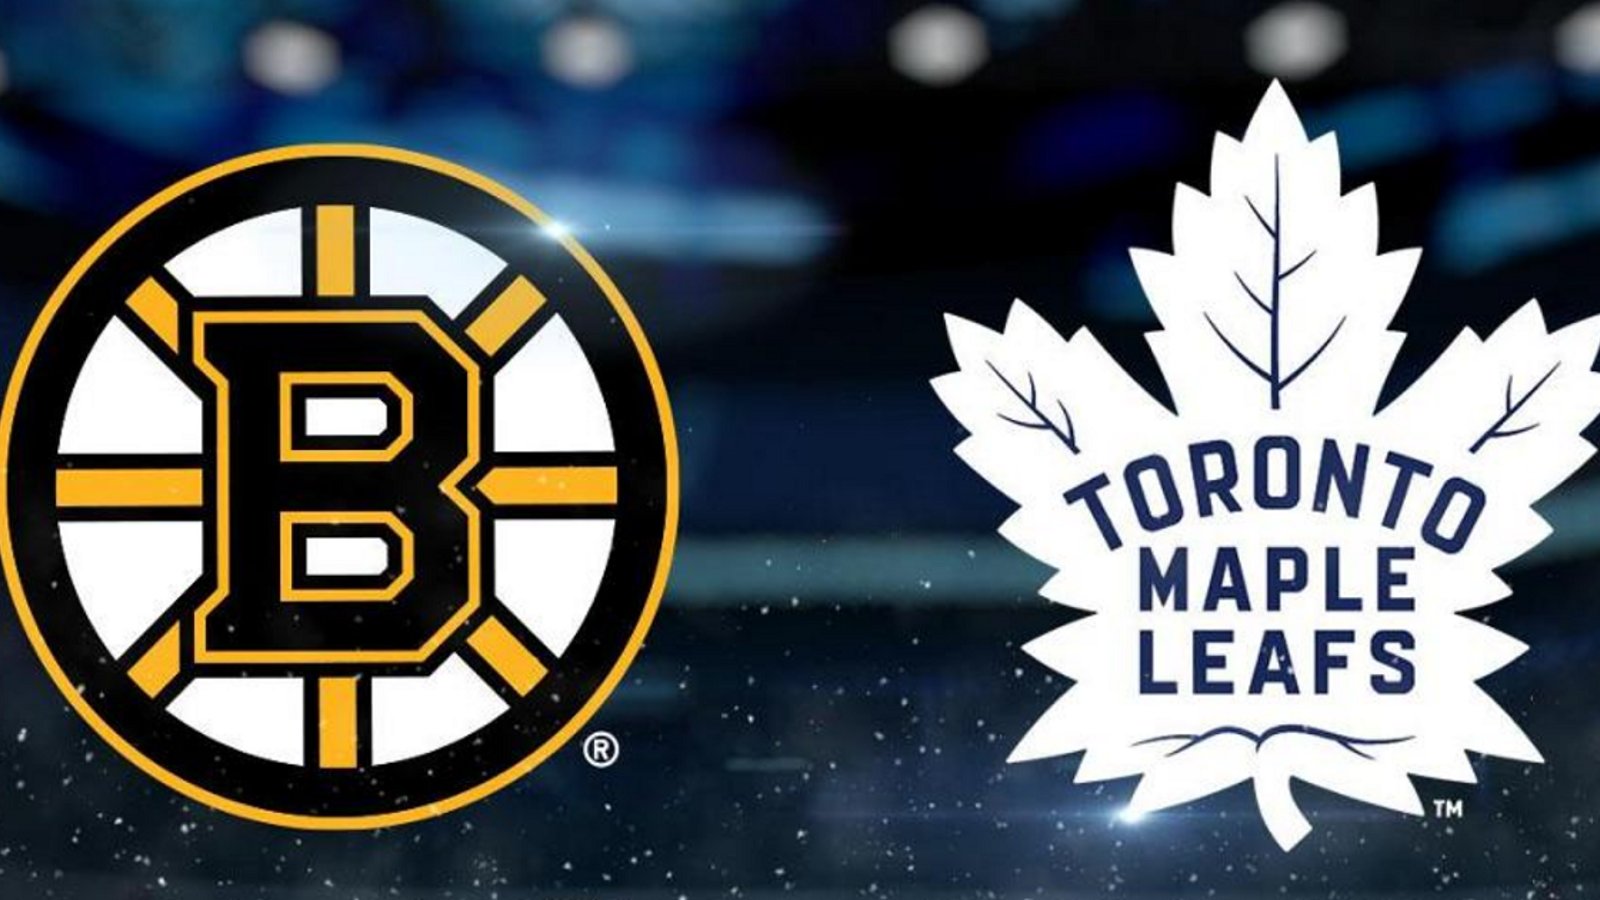 Full lineups for both Bruins and Maple Leafs in Game 4.